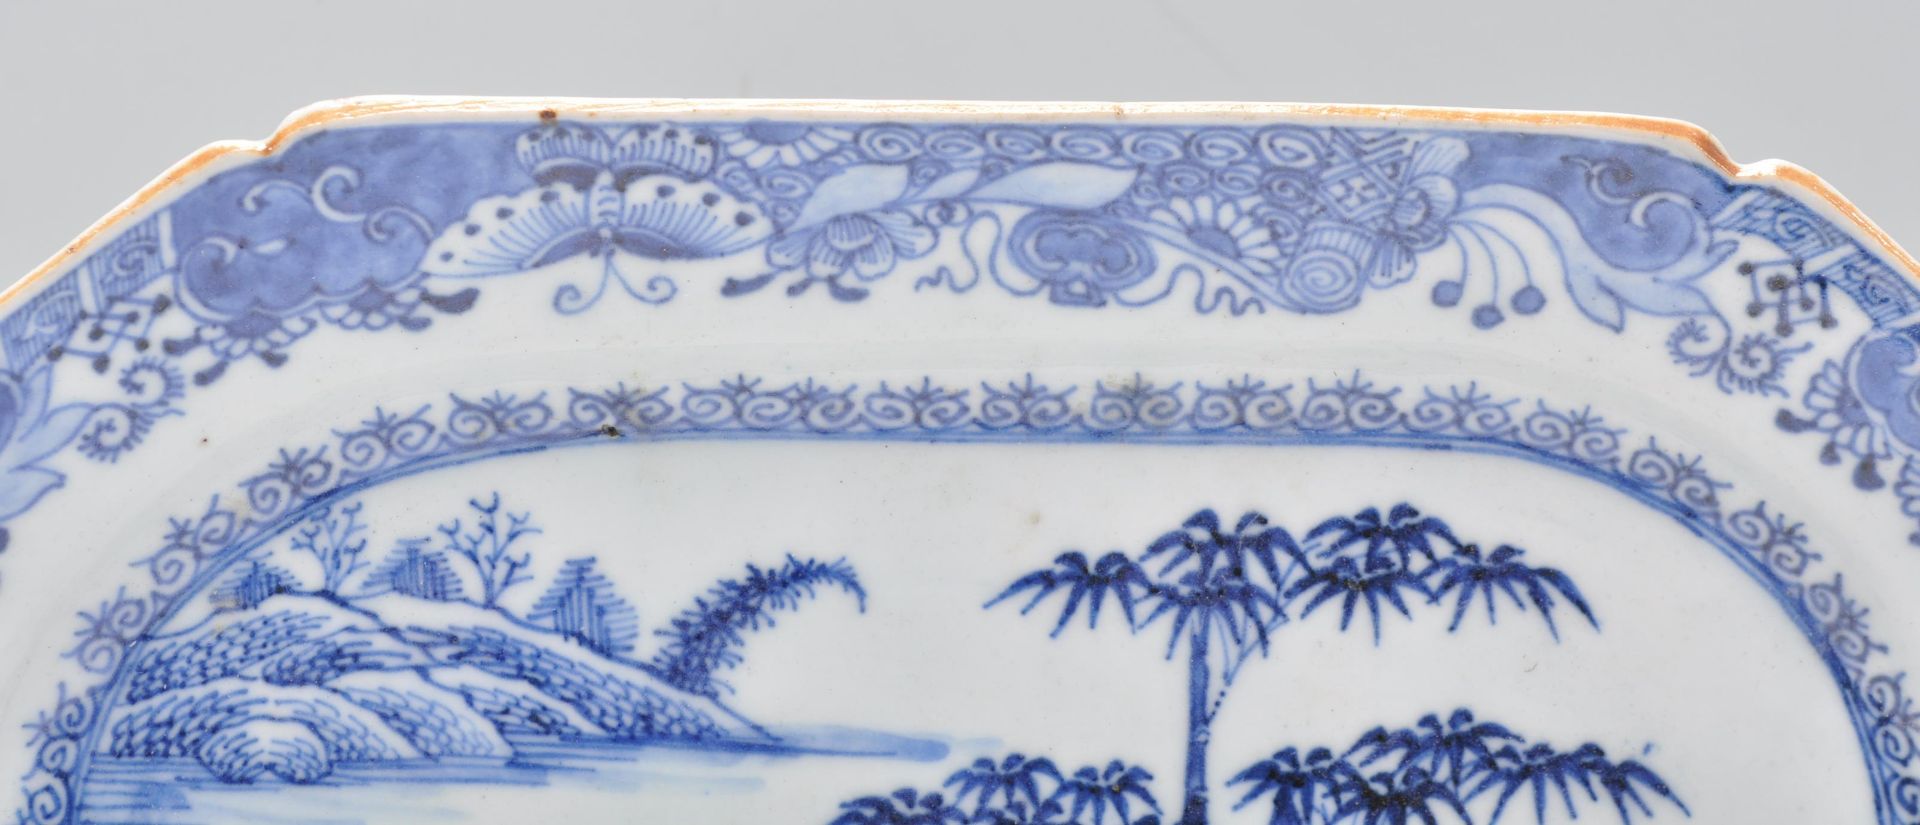 A 19th Century Chinese blue and white ceramic tray - Image 2 of 8